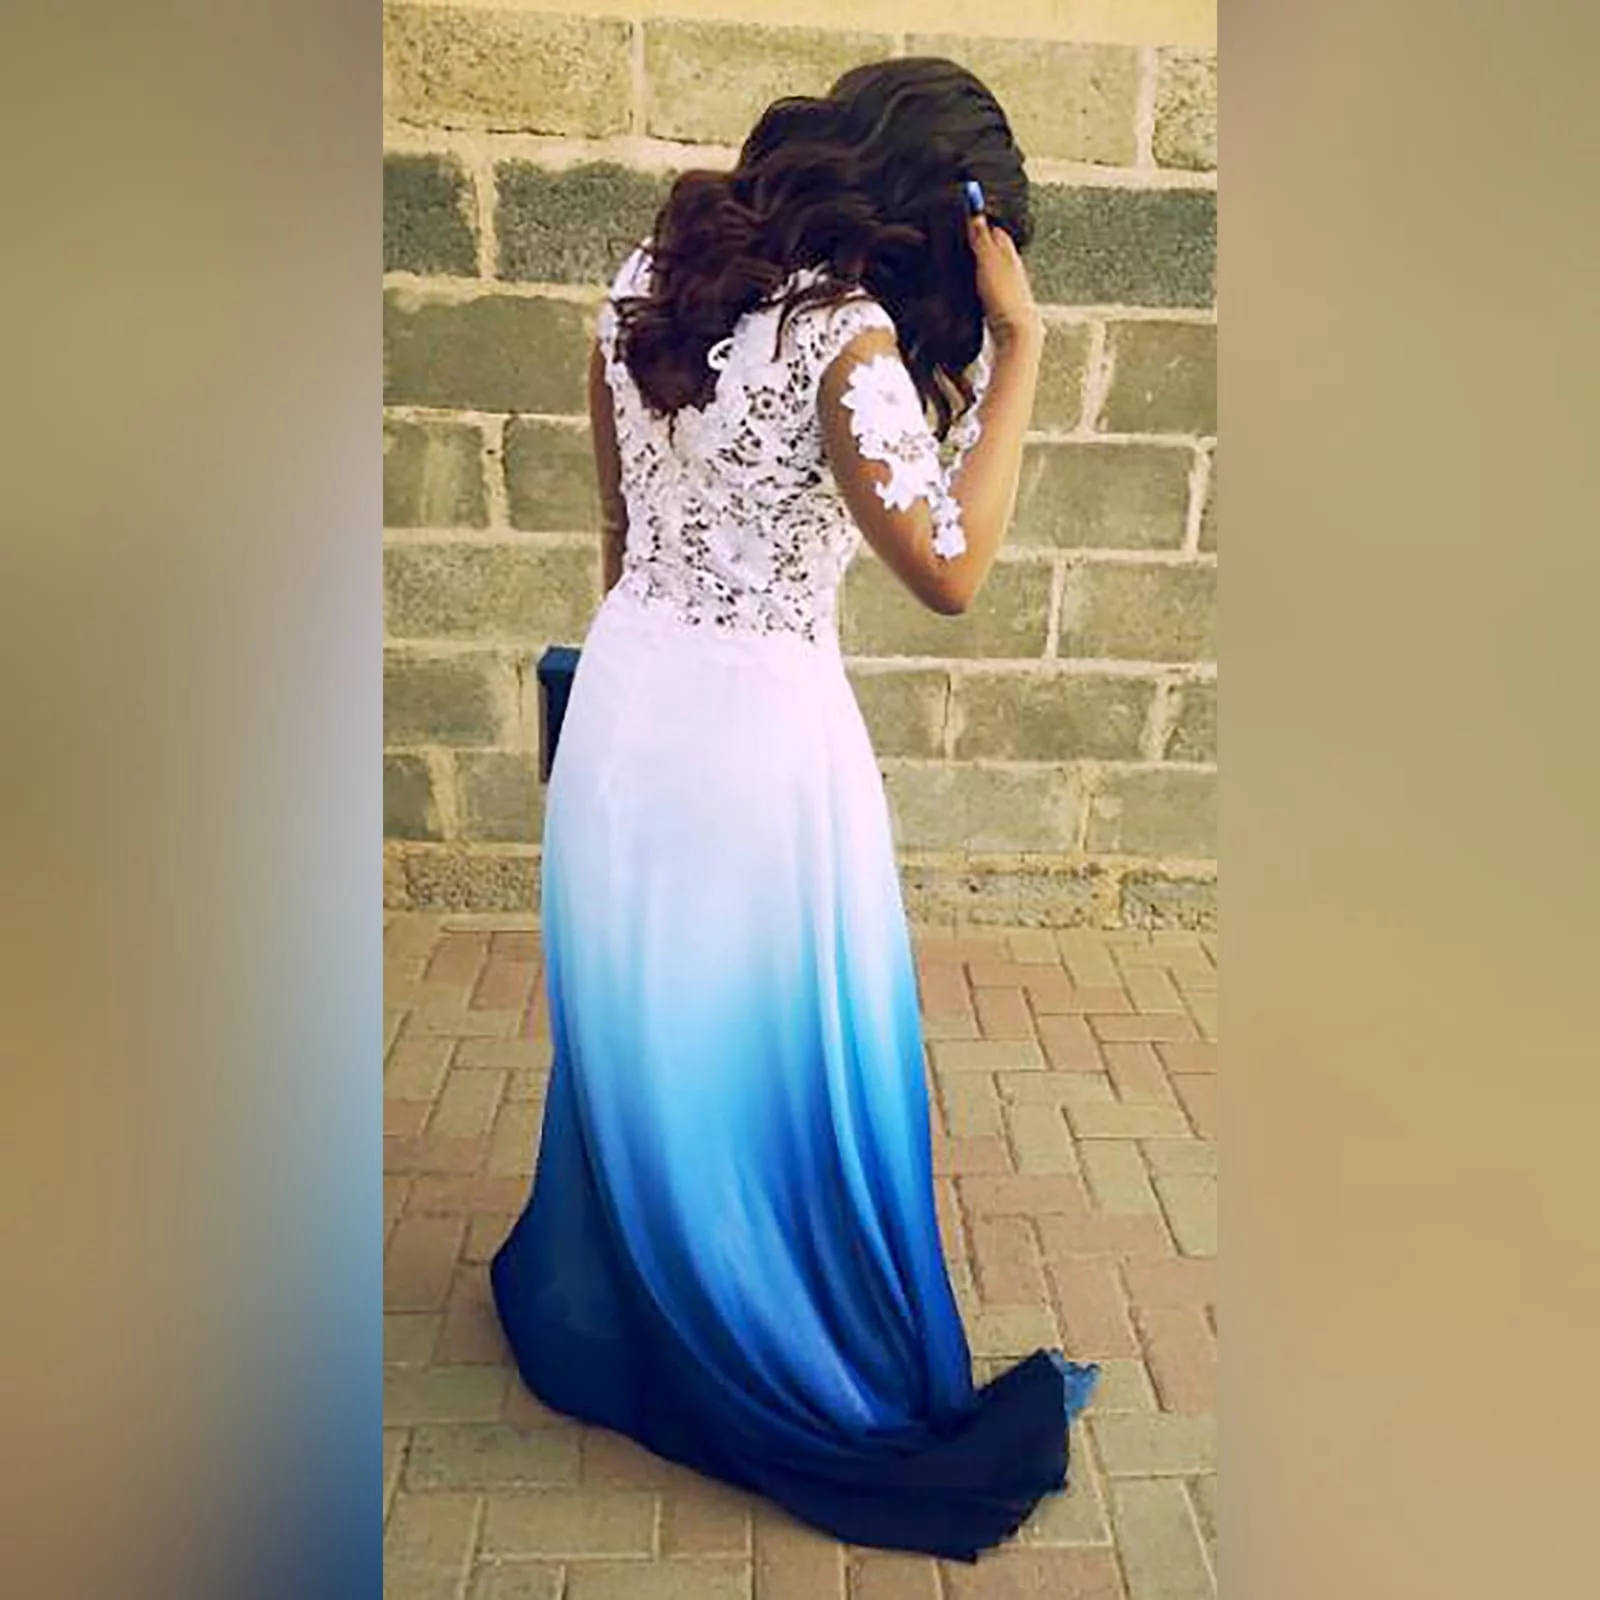 Gorgeous blue and white ombre flowy ceremony dress 2 a gorgeous blue and white ombre flowy ceremony dress created for a prom night. With a classy white bodice with elegant illusion lace sleeves. With a slit and a train